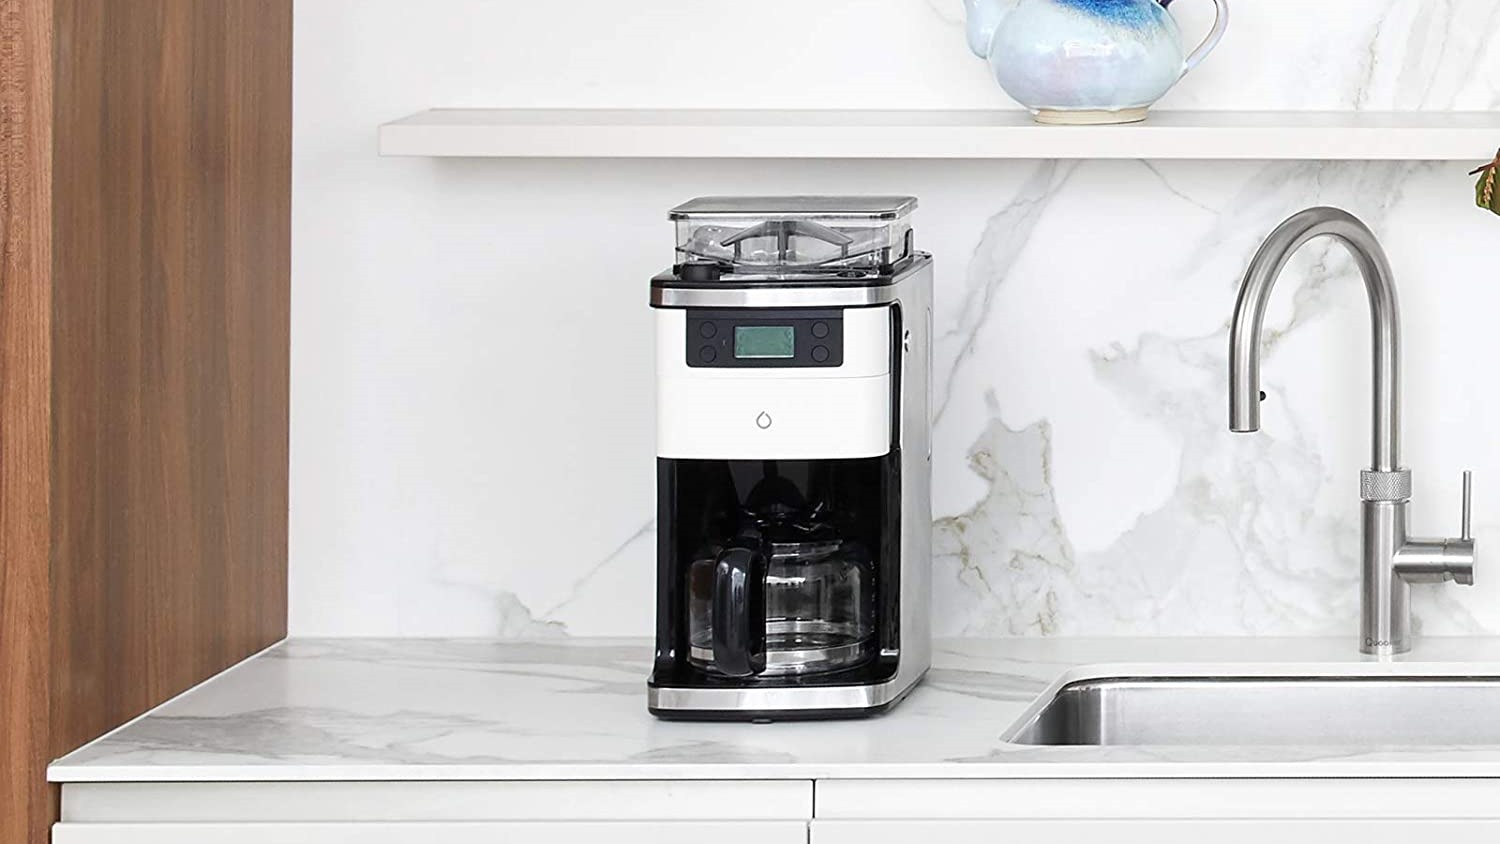 smarter coffee: This coffee maker can brew a cuppa using your